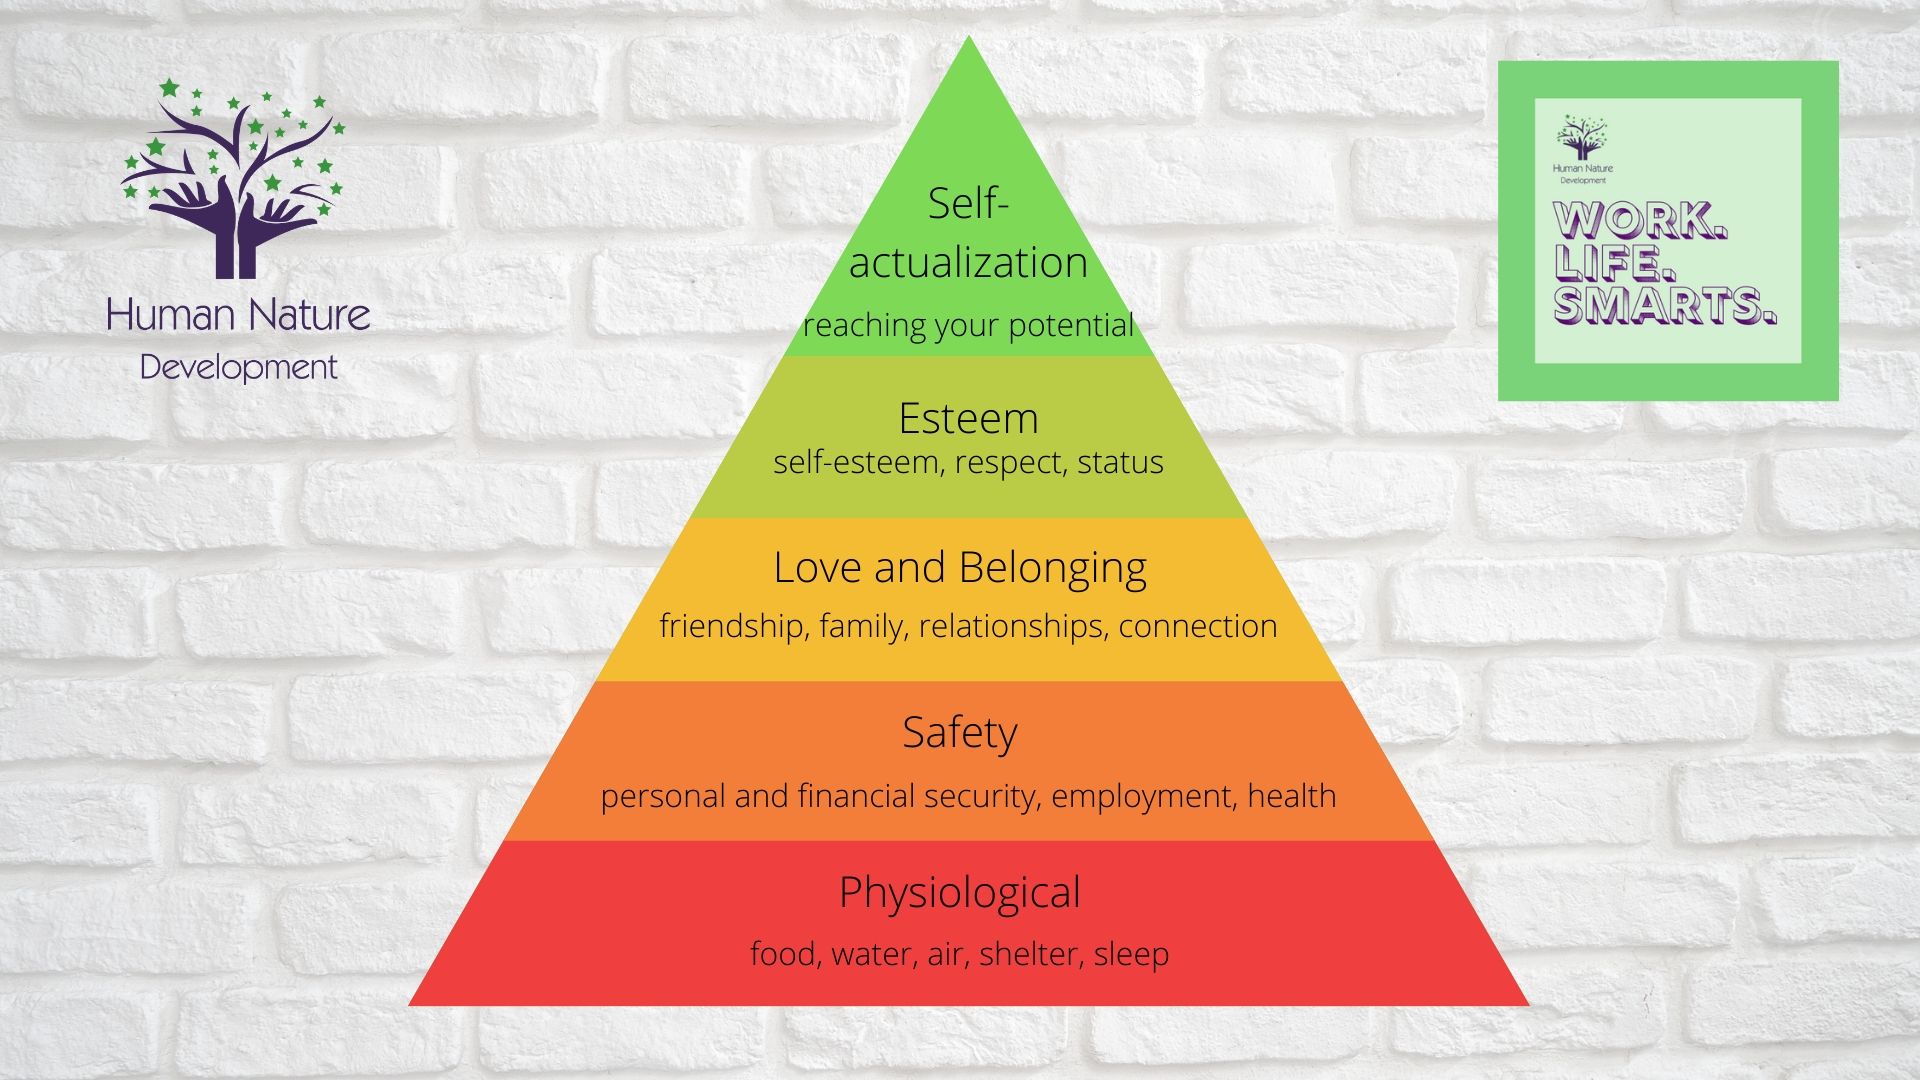 maslow's hierarchy of needs